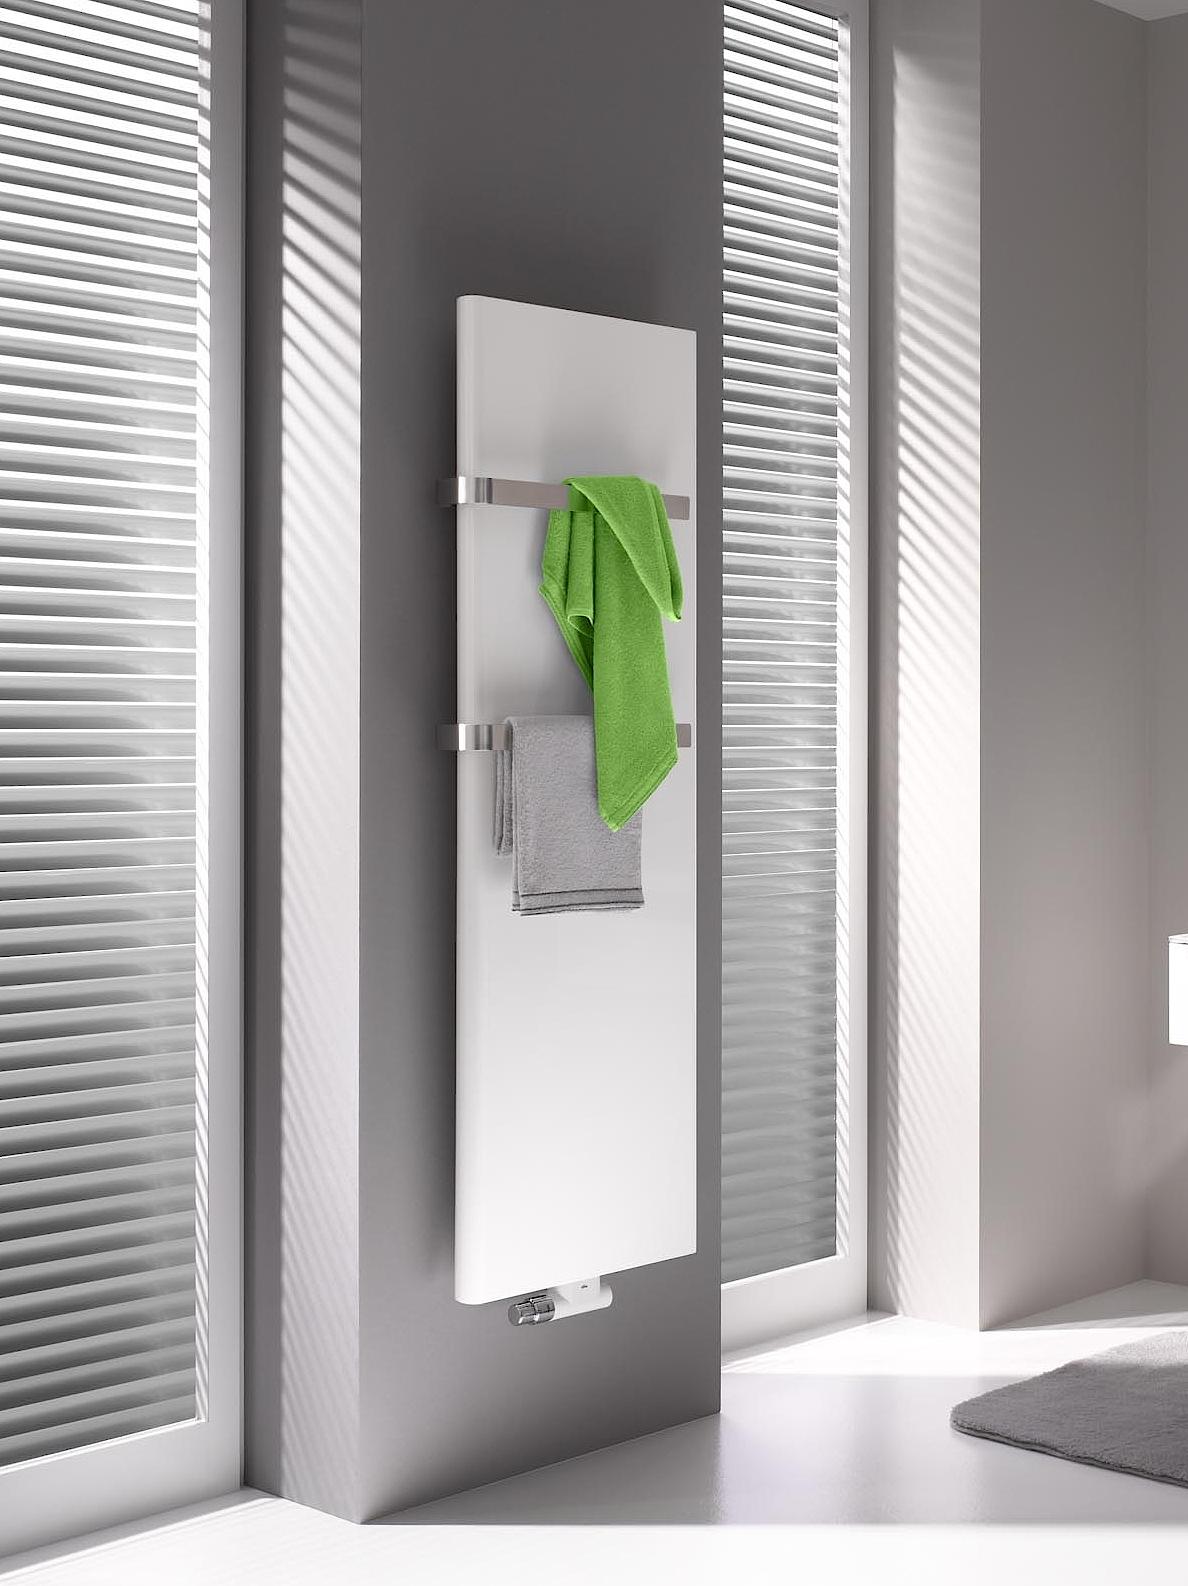 Thanks to its unique x2 technology, the Kermi Pateo design and bathroom radiator is a true trailblazer in performance and energy efficiency.